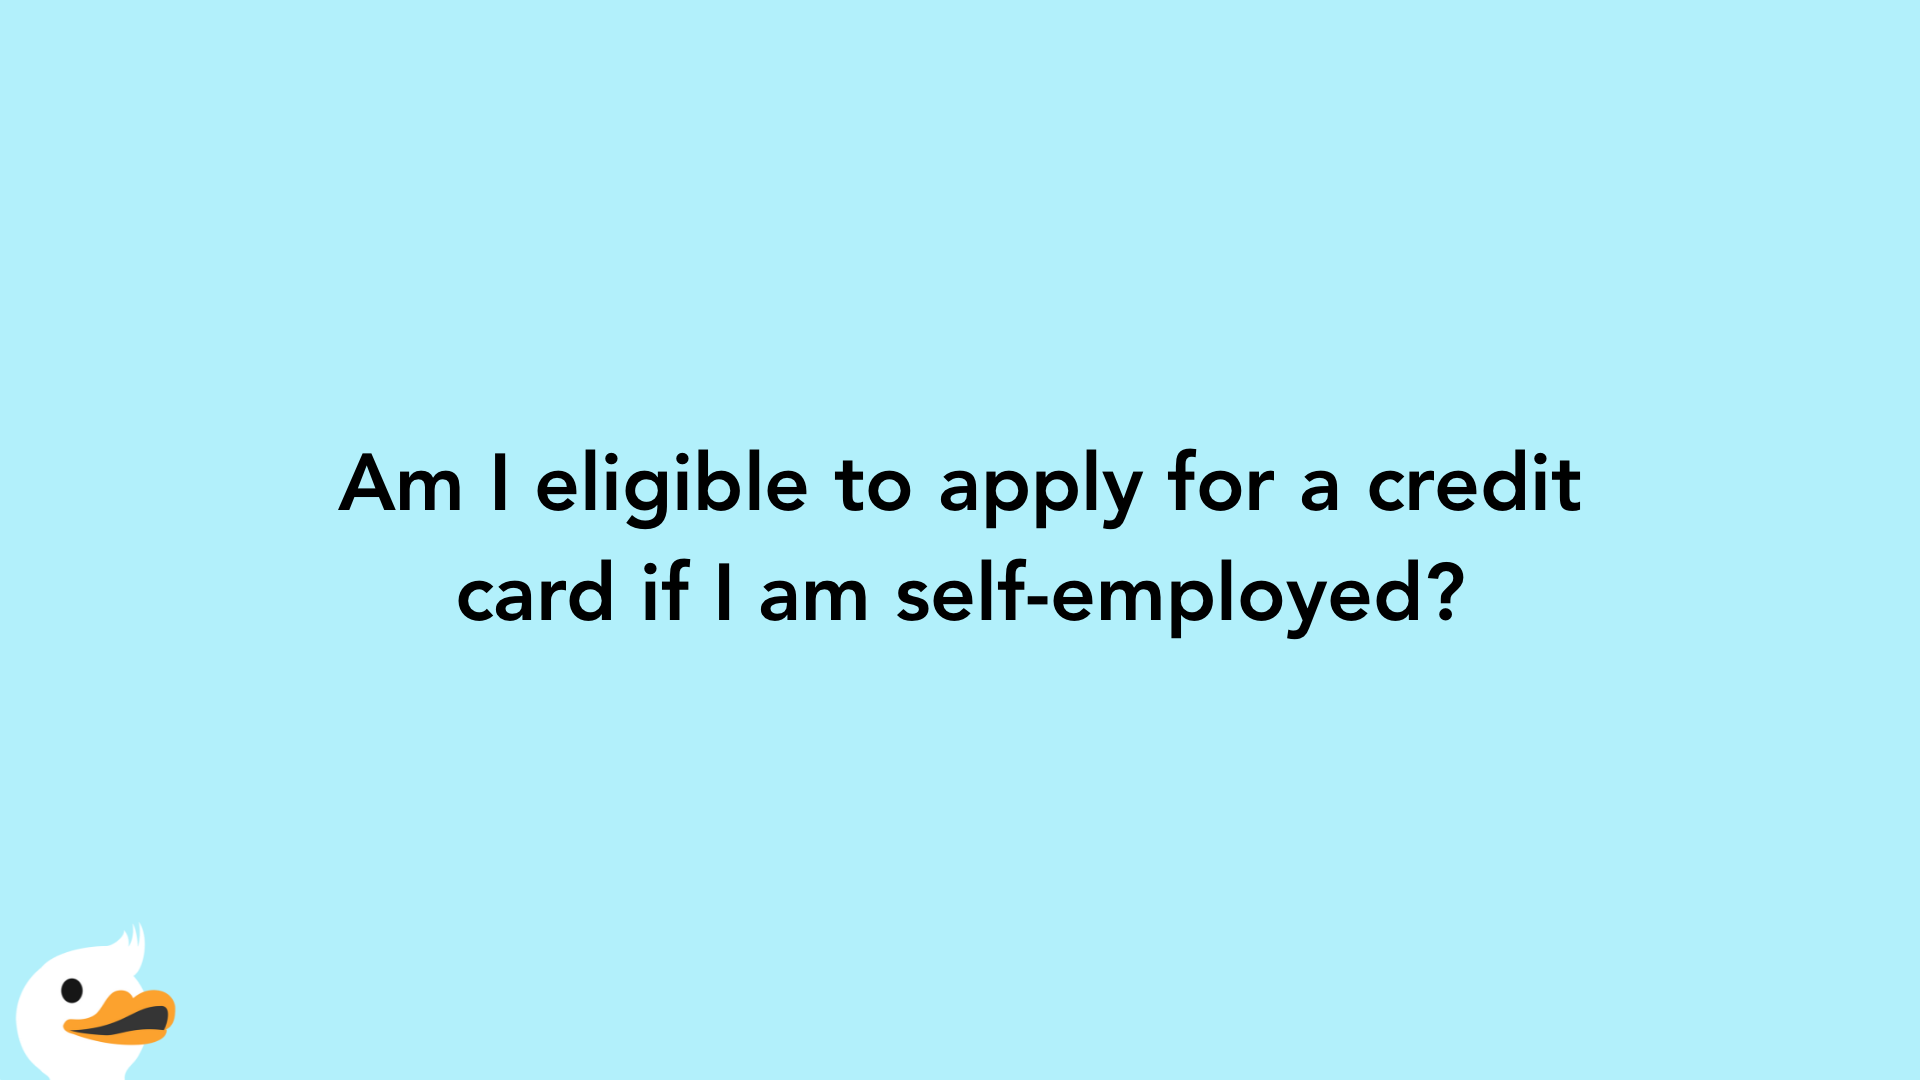 Am I eligible to apply for a credit card if I am self-employed?